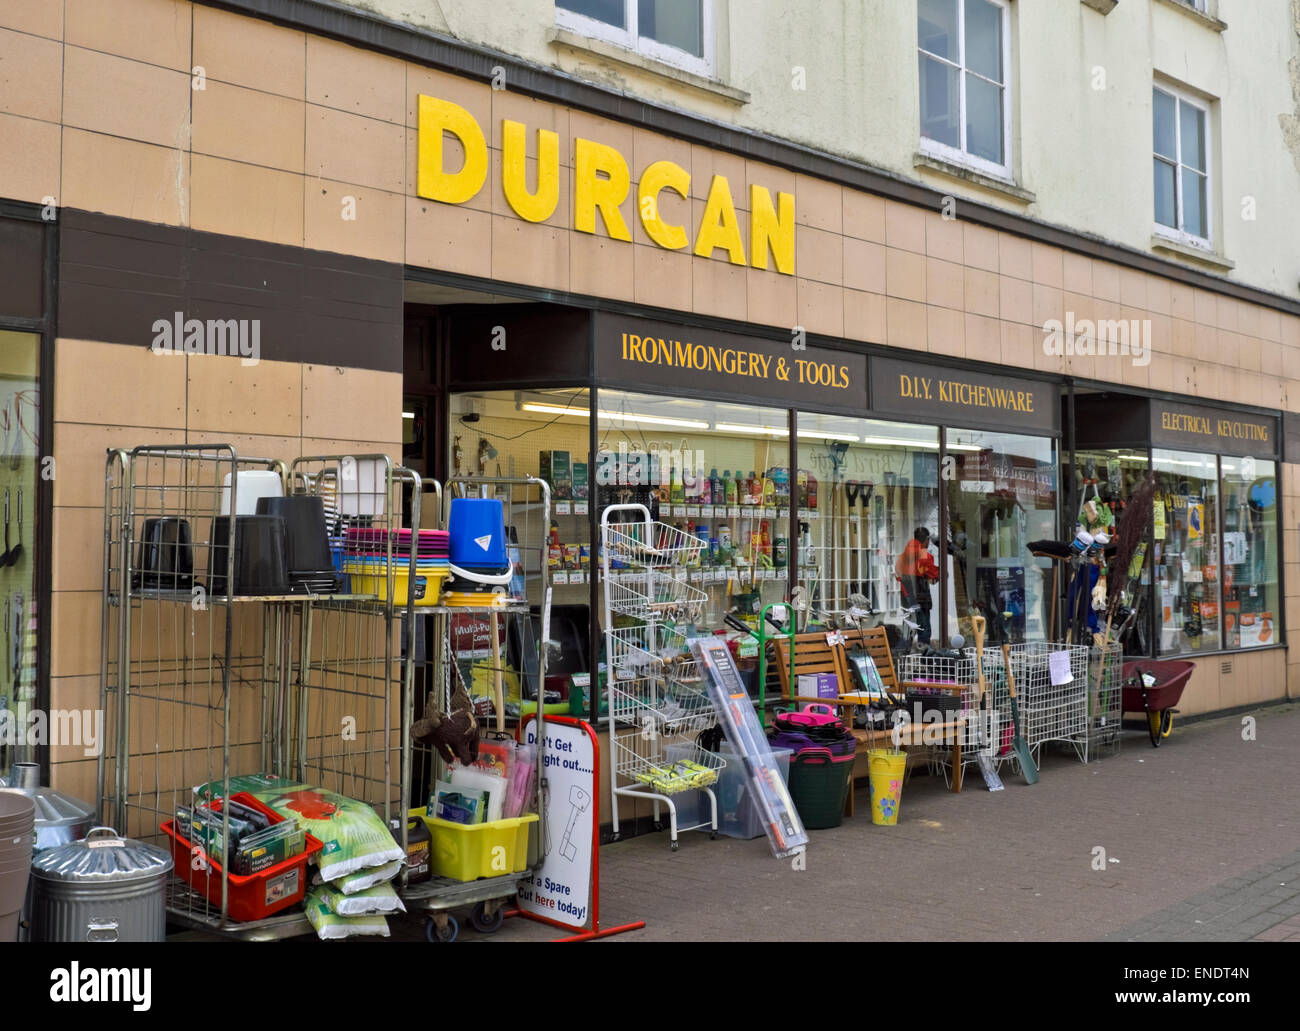 Durcan Hardware shop Dursley una piccola città mercato nel Southern Cotswolds, Gloucestershire in Inghilterra Foto Stock